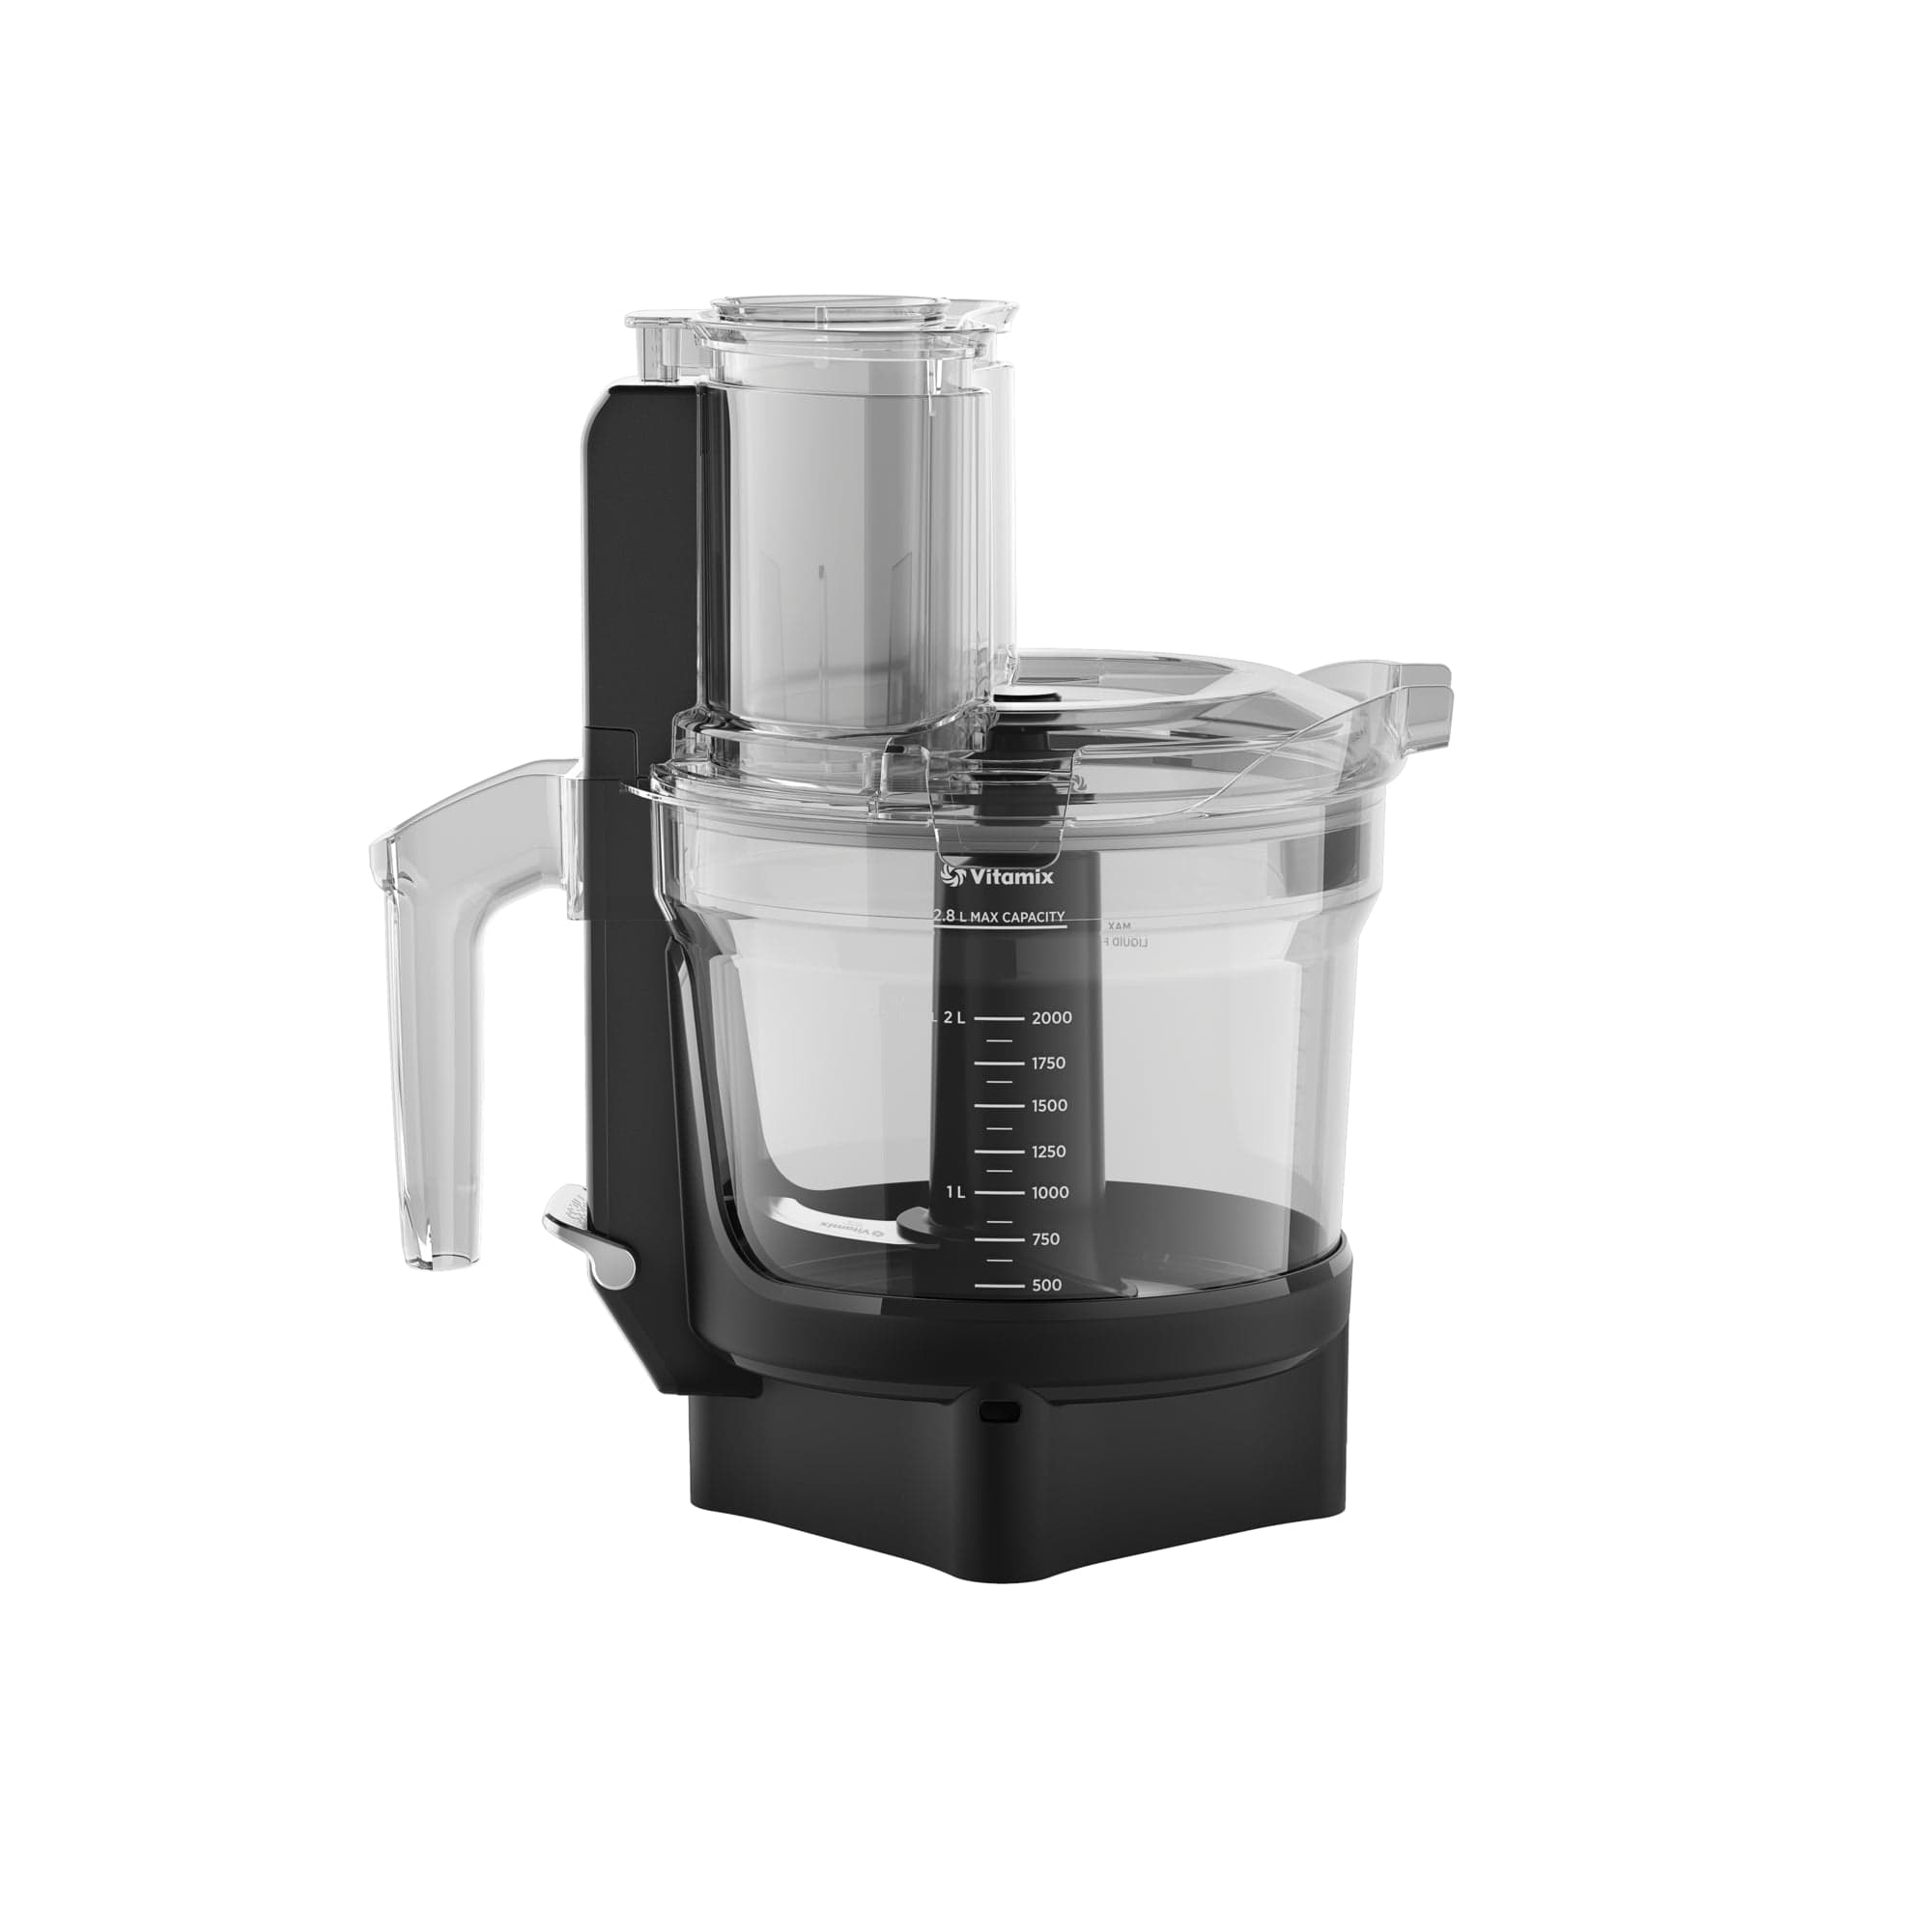 Vitamix ® A3500 Series Brushed Stainless Steel Blender with Food Processor Attachment